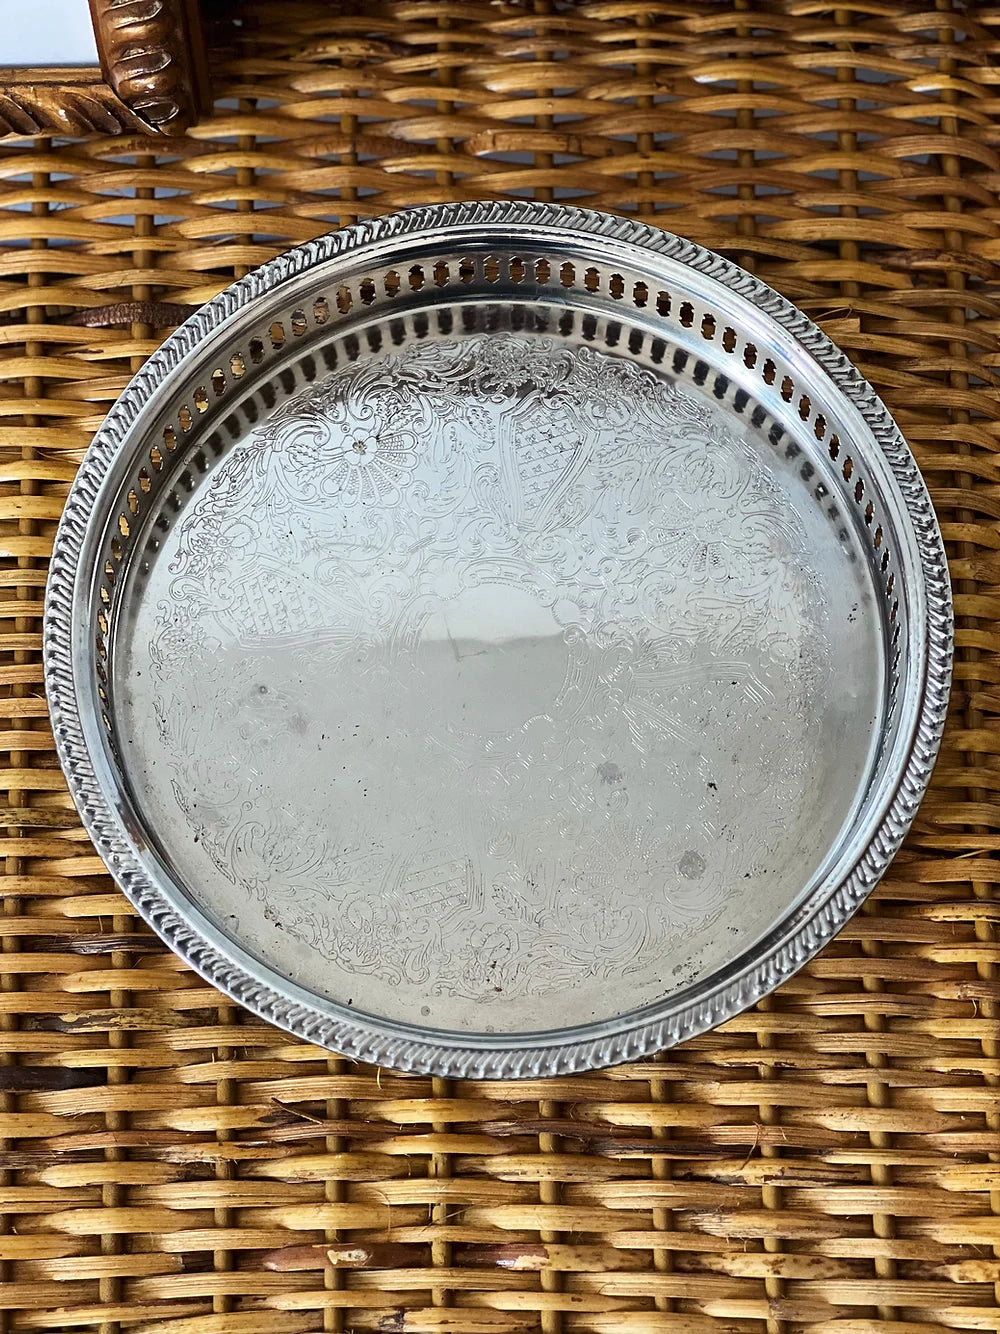 small vintage silver serving tray on wicker